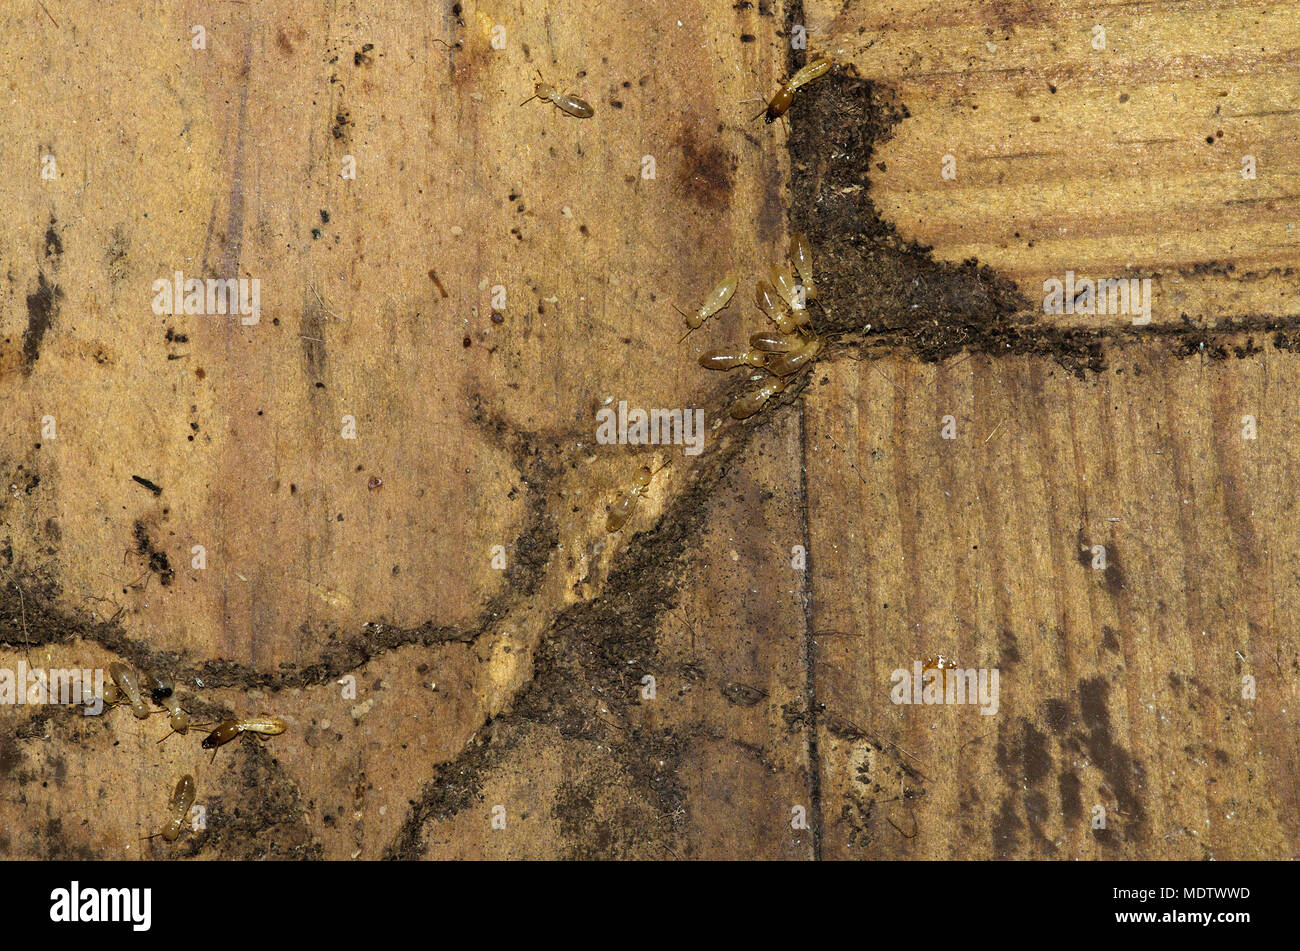 Drywood termites workers and soldiers going over wood floor and entering an hiding tunnel. Soft and pale colored body. Stock Photo